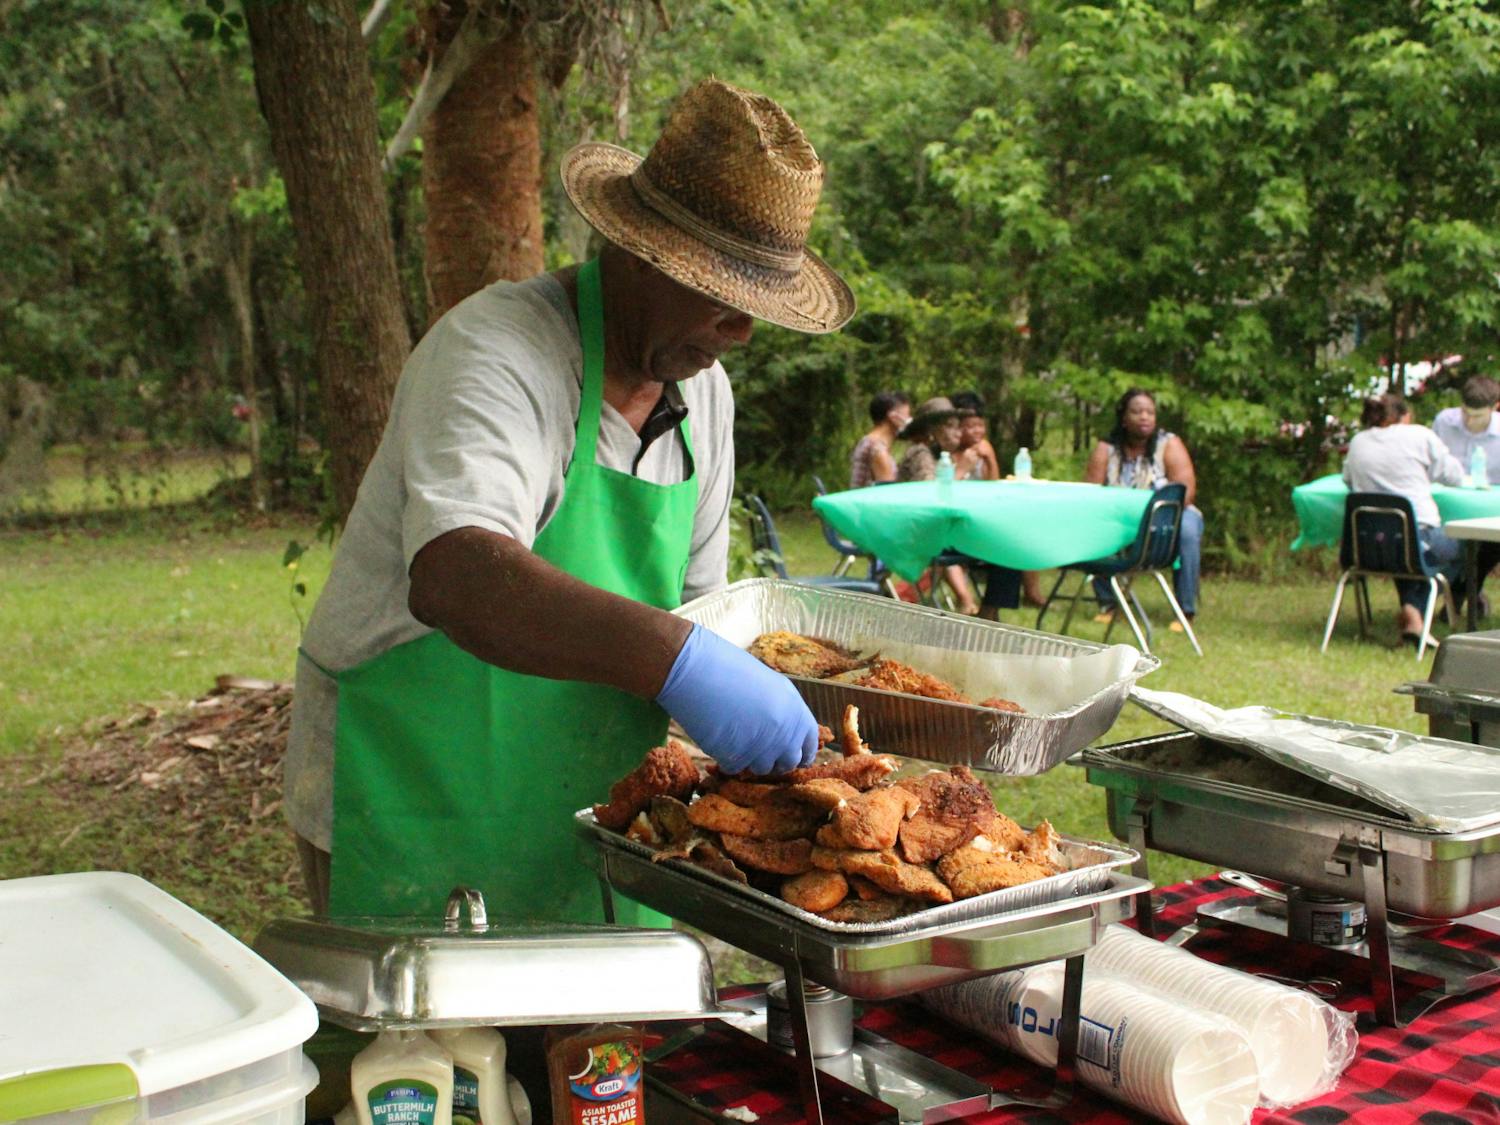 George Foxx helps serve food for the Florida Emancipation Day celebration at the Cotton Club Museum and Cultural Center on Friday, May 20, 2022.